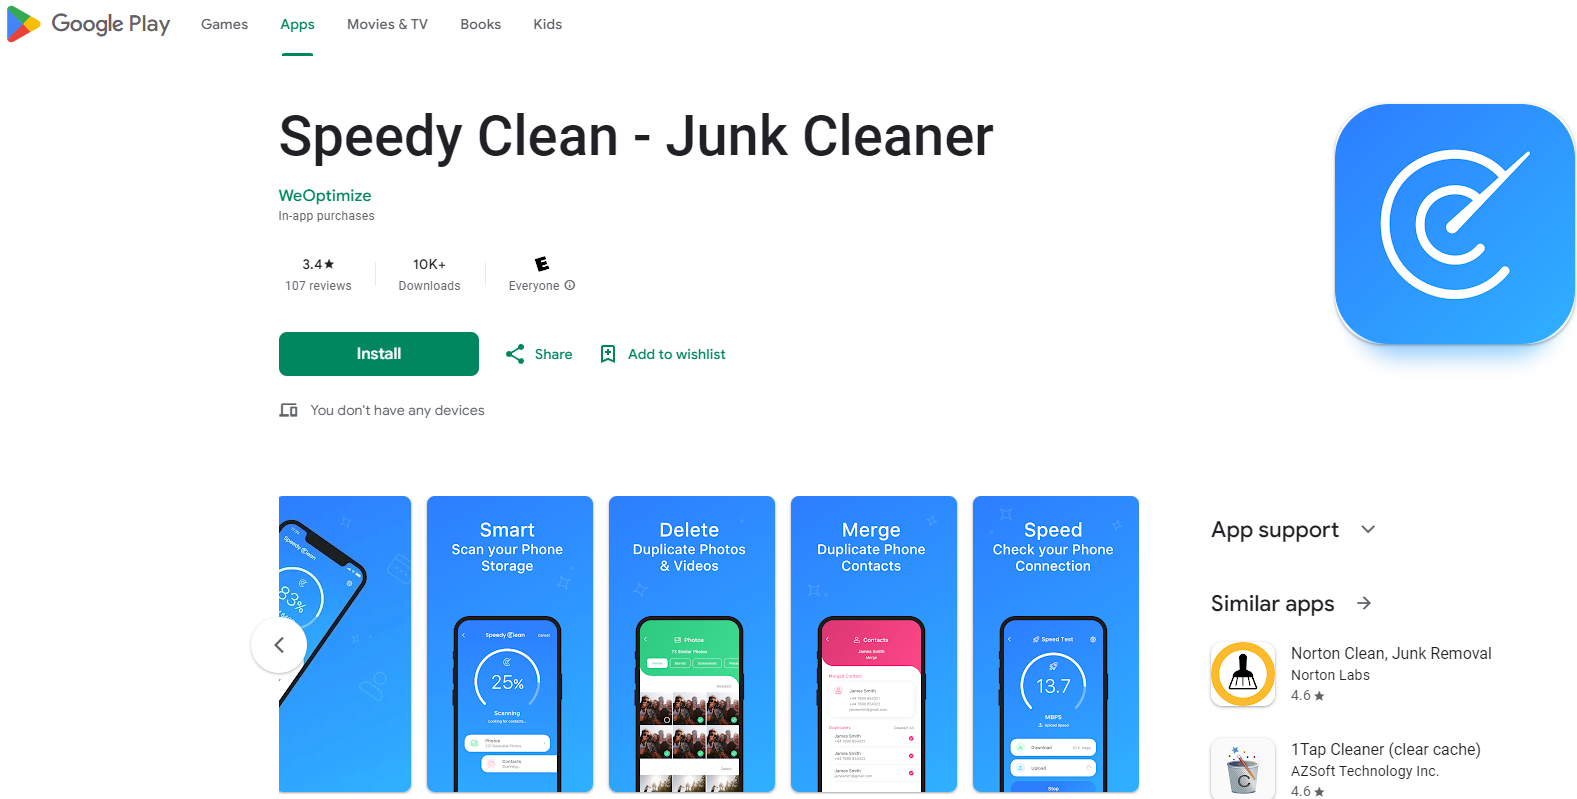  Install and Use the Speedy Cleaner App !